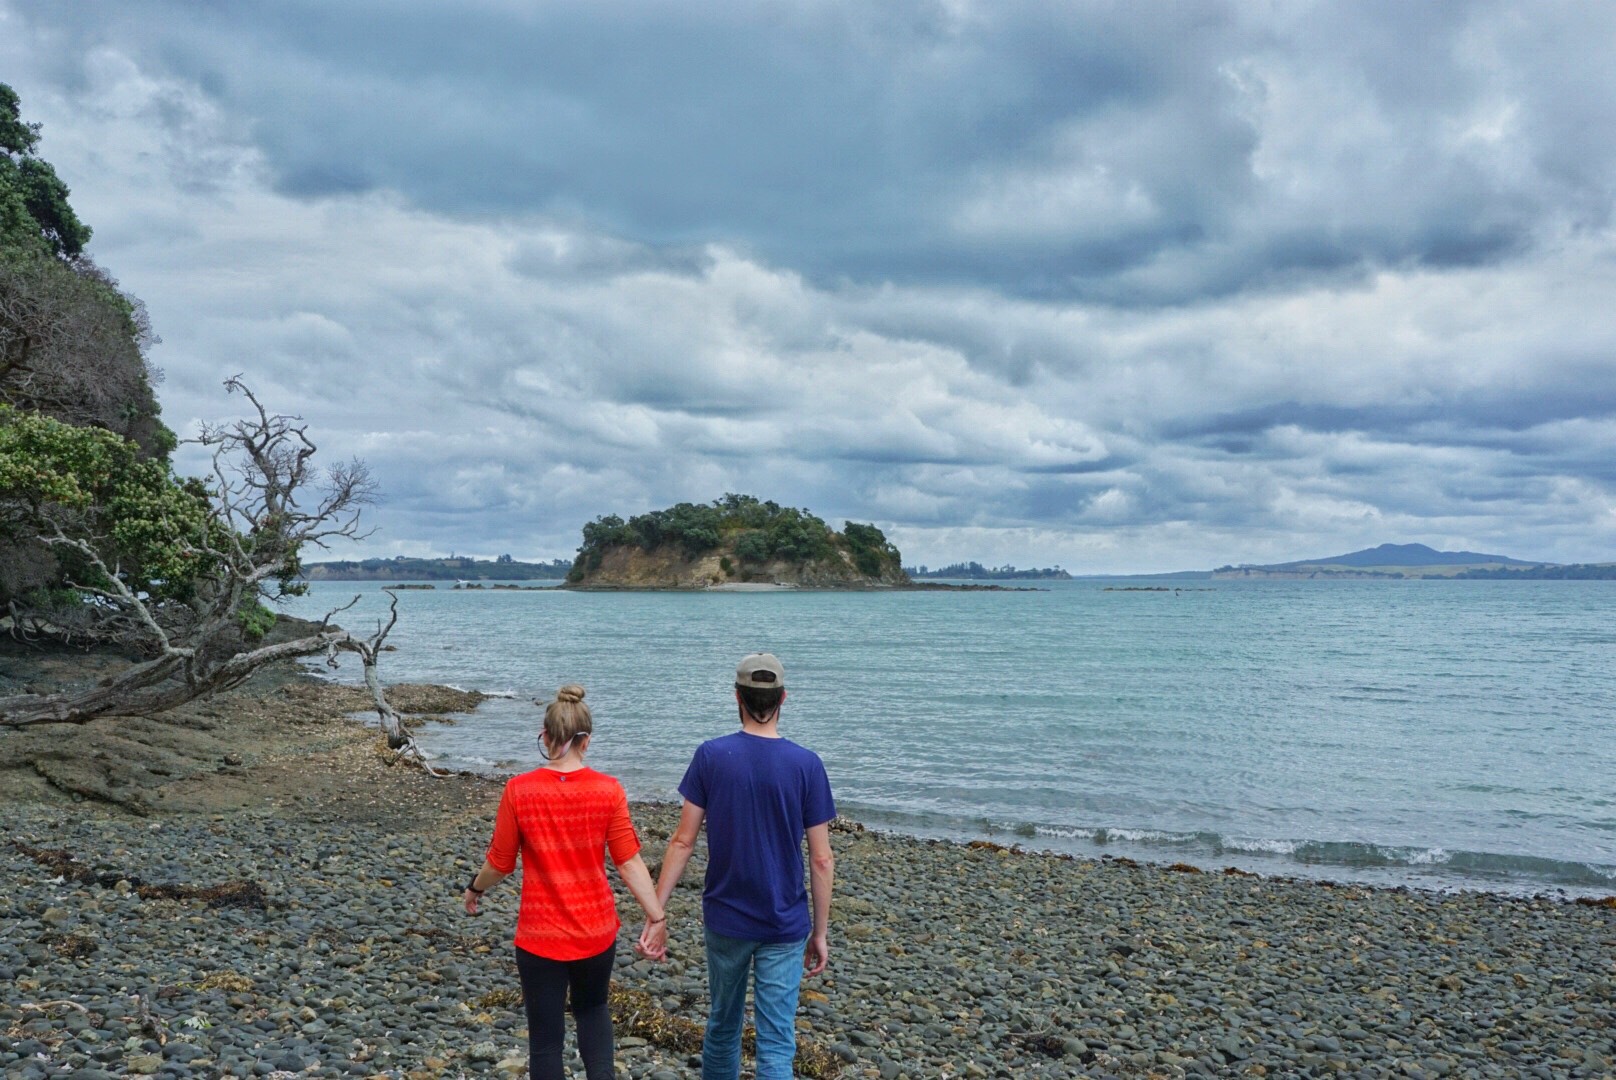 A man and a woman holding hands walking on a rocky shore on a cloudy day